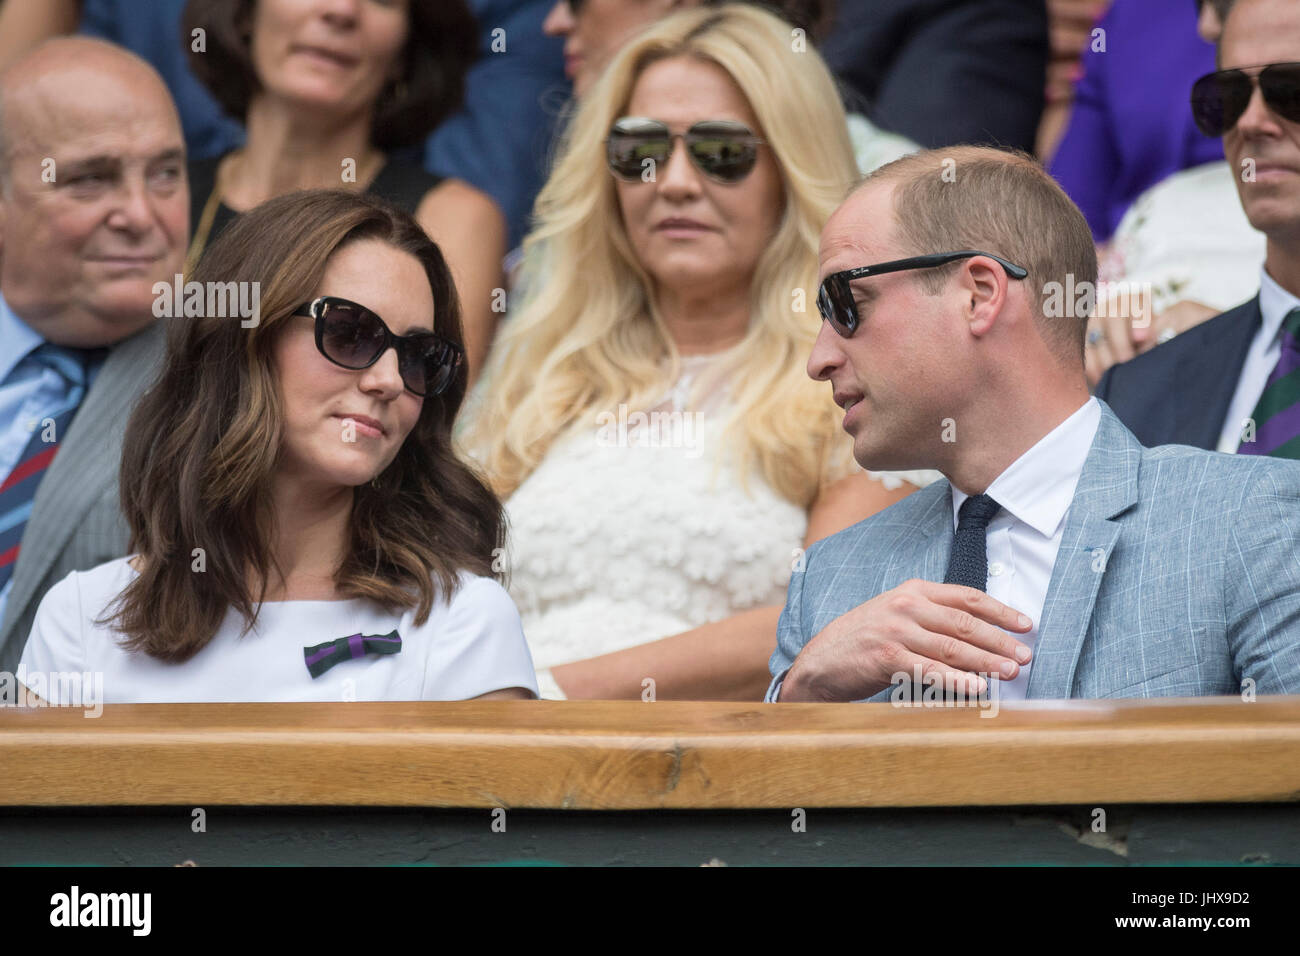 Wimbledon, London, UK. 16th July, 2017. The Wimbledon Tennis Championships 2017 held at The All England Lawn Tennis and Croquet Club, London, England, UK. GENTLEMEN'S SINGLES - FINAL Roger Federer (SUI) [3] v Marin Cilic (CRO) [7] on Centre Court. The Duke and Duchess of Cambridge watch the match from the Royal Box . Credit: Duncan Grove/Alamy Live News Stock Photo